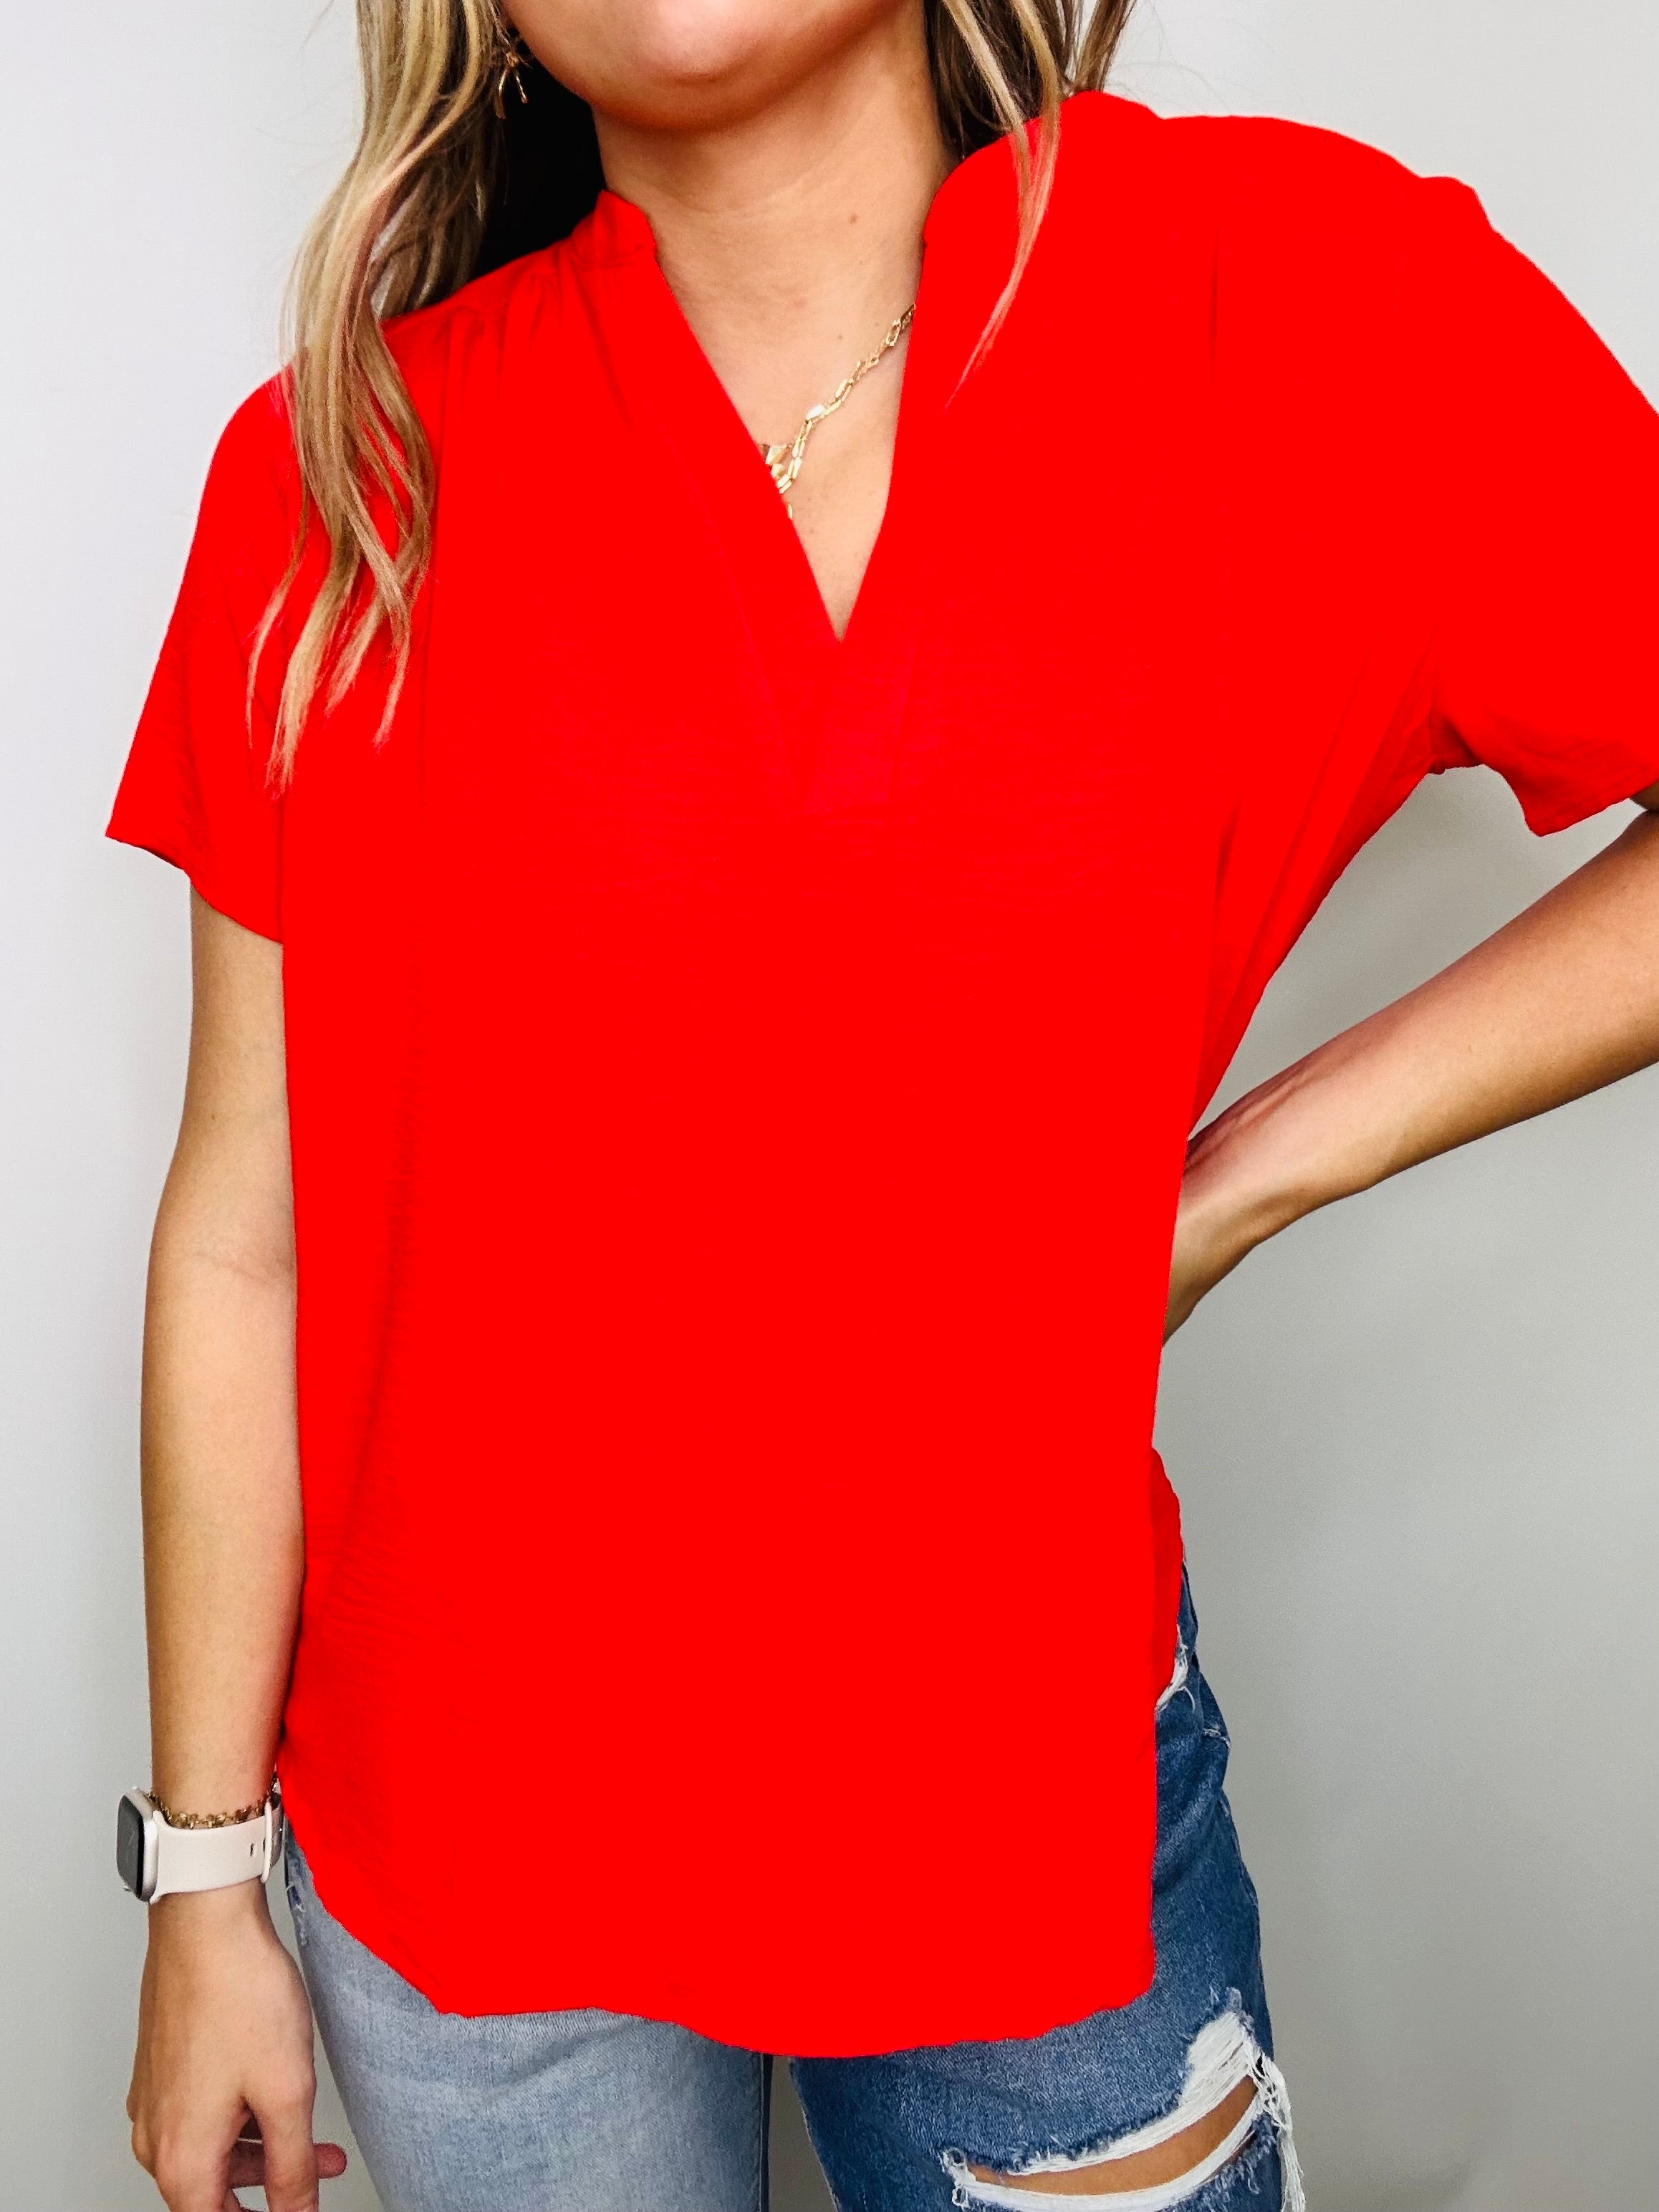 Classic Red Work V Neck Top